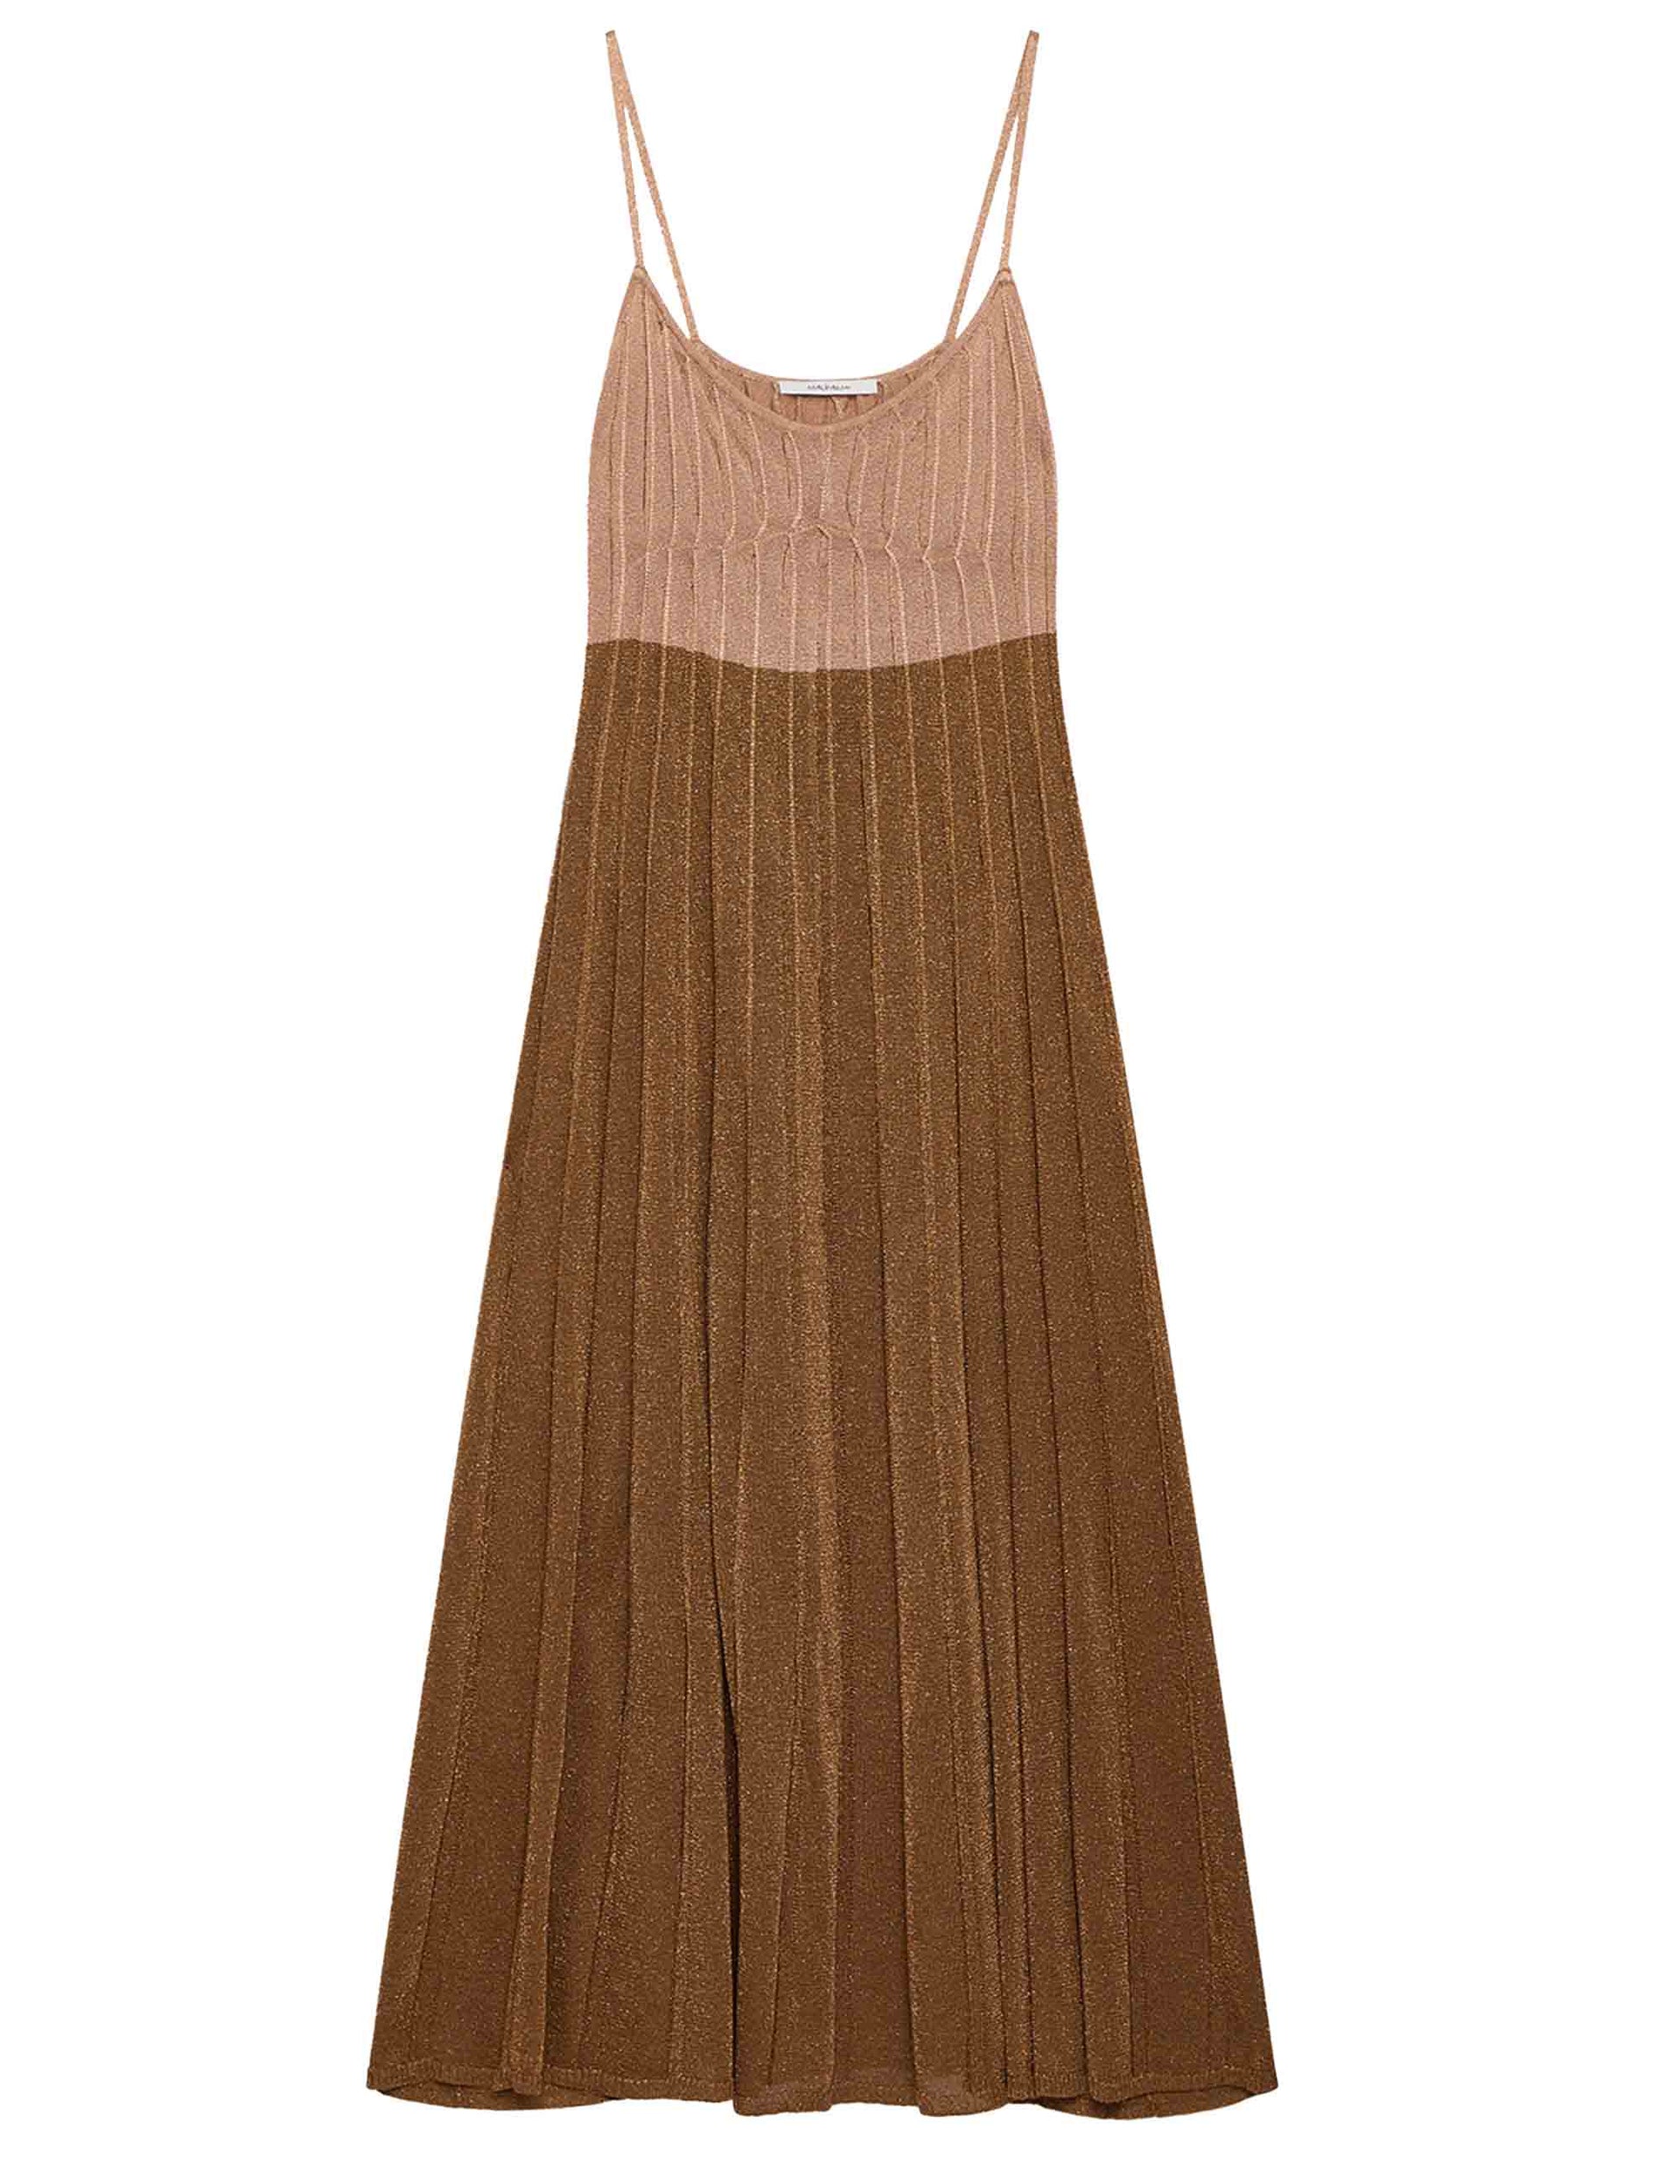 Lurex Touch women's dresses in natural brown viscose with straps